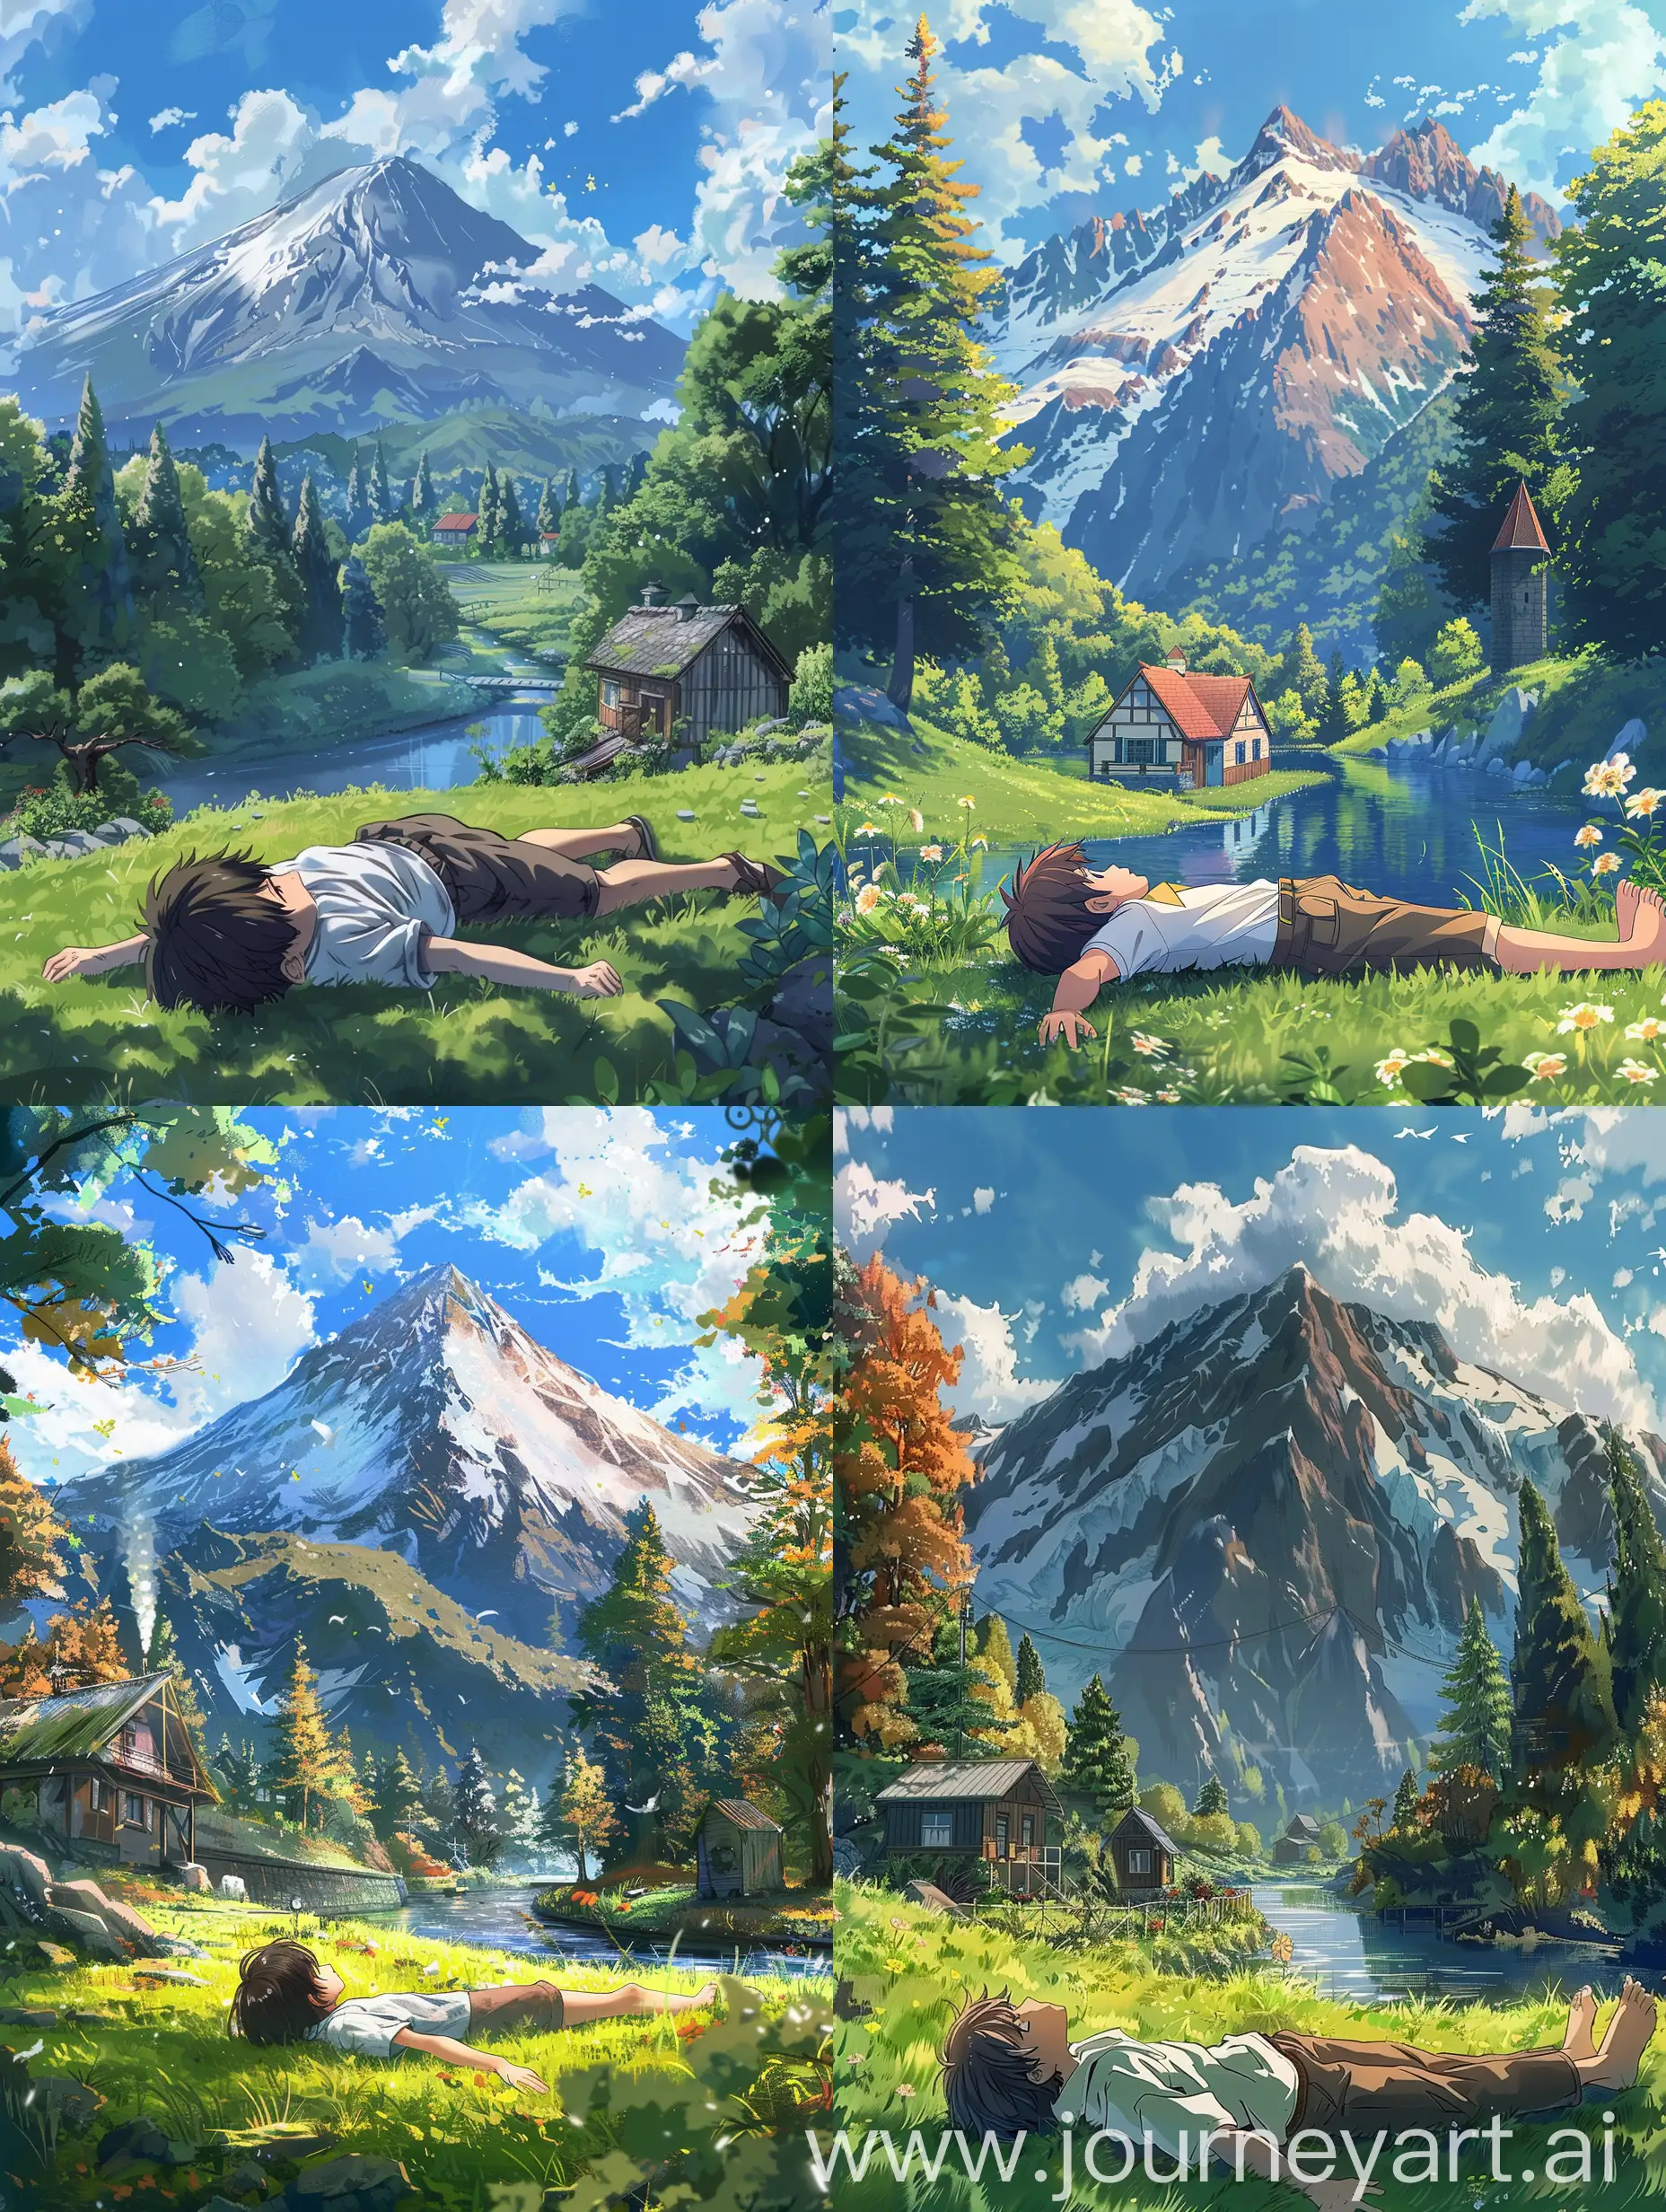 An anime boy lay on the grass field to see beautiful mountain and trees
And a peaceful canal and a cottage beside him 